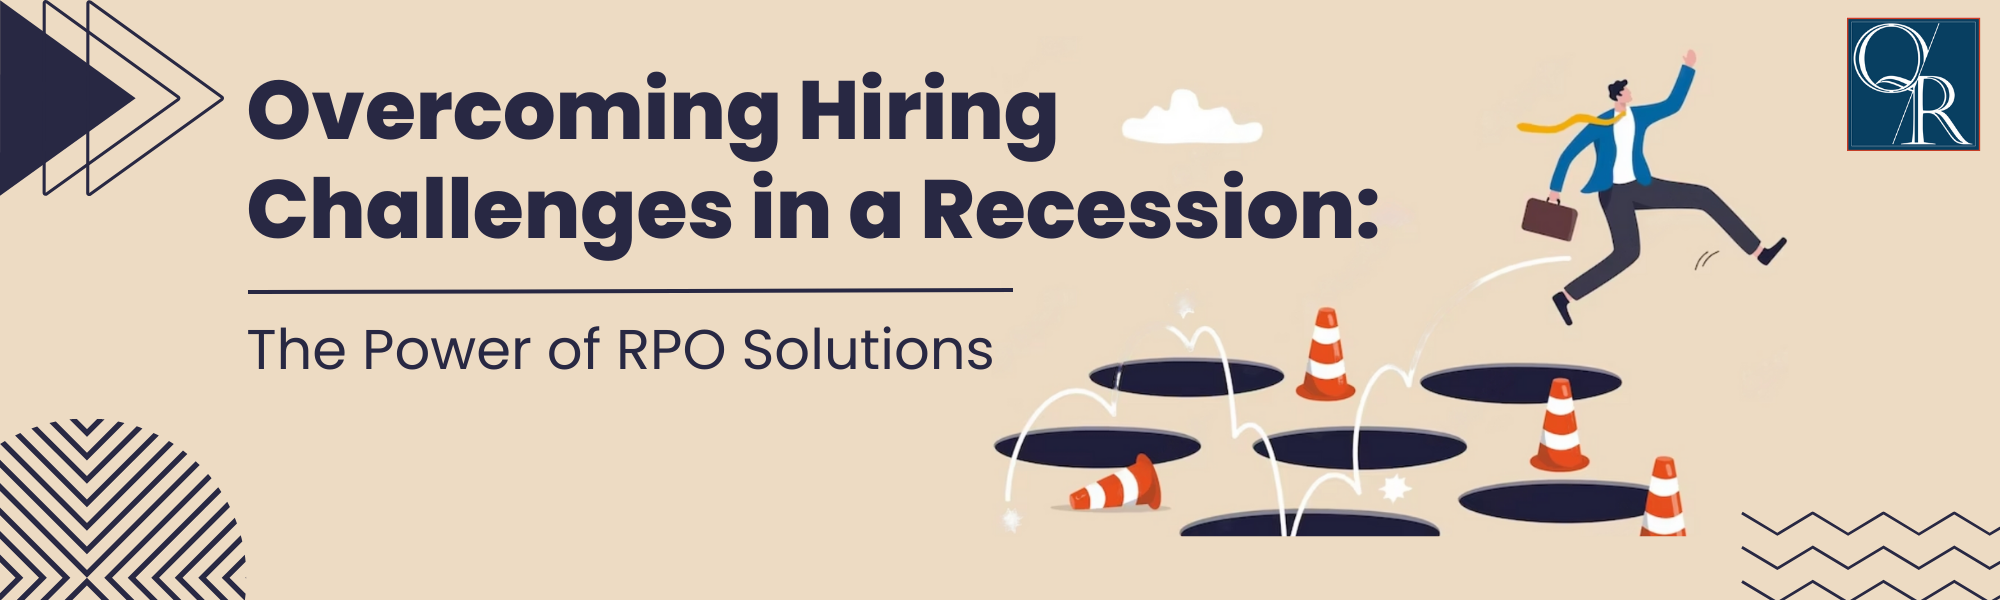 Overcoming Hiring Challenges in a Recession: The Power of RPO